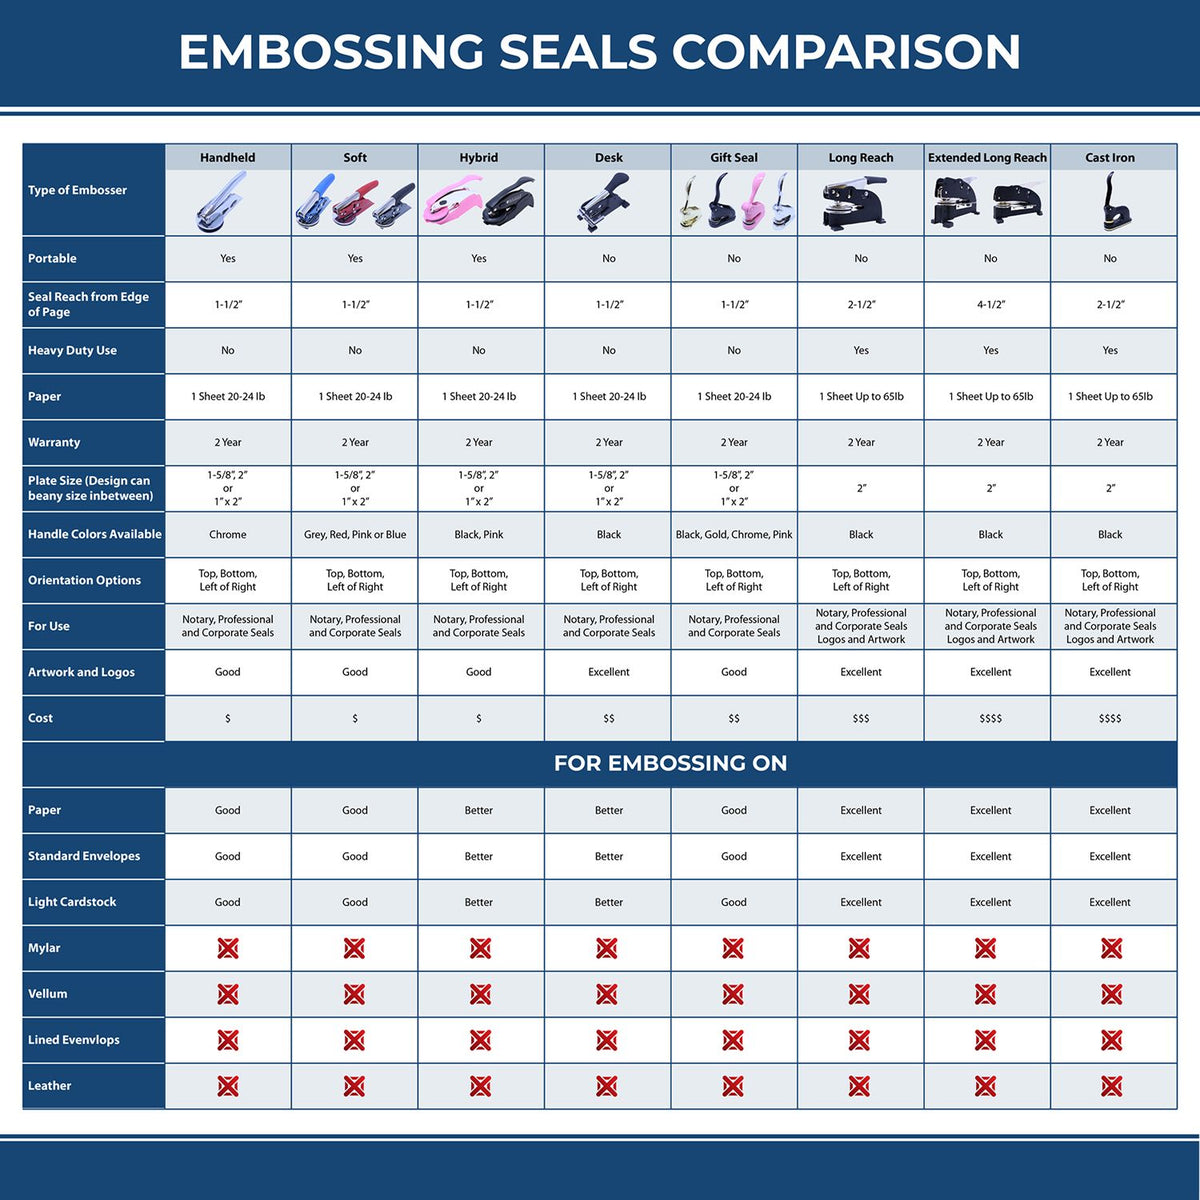 A comparison chart for the different types of mount models available for the Hybrid Idaho Engineer Seal